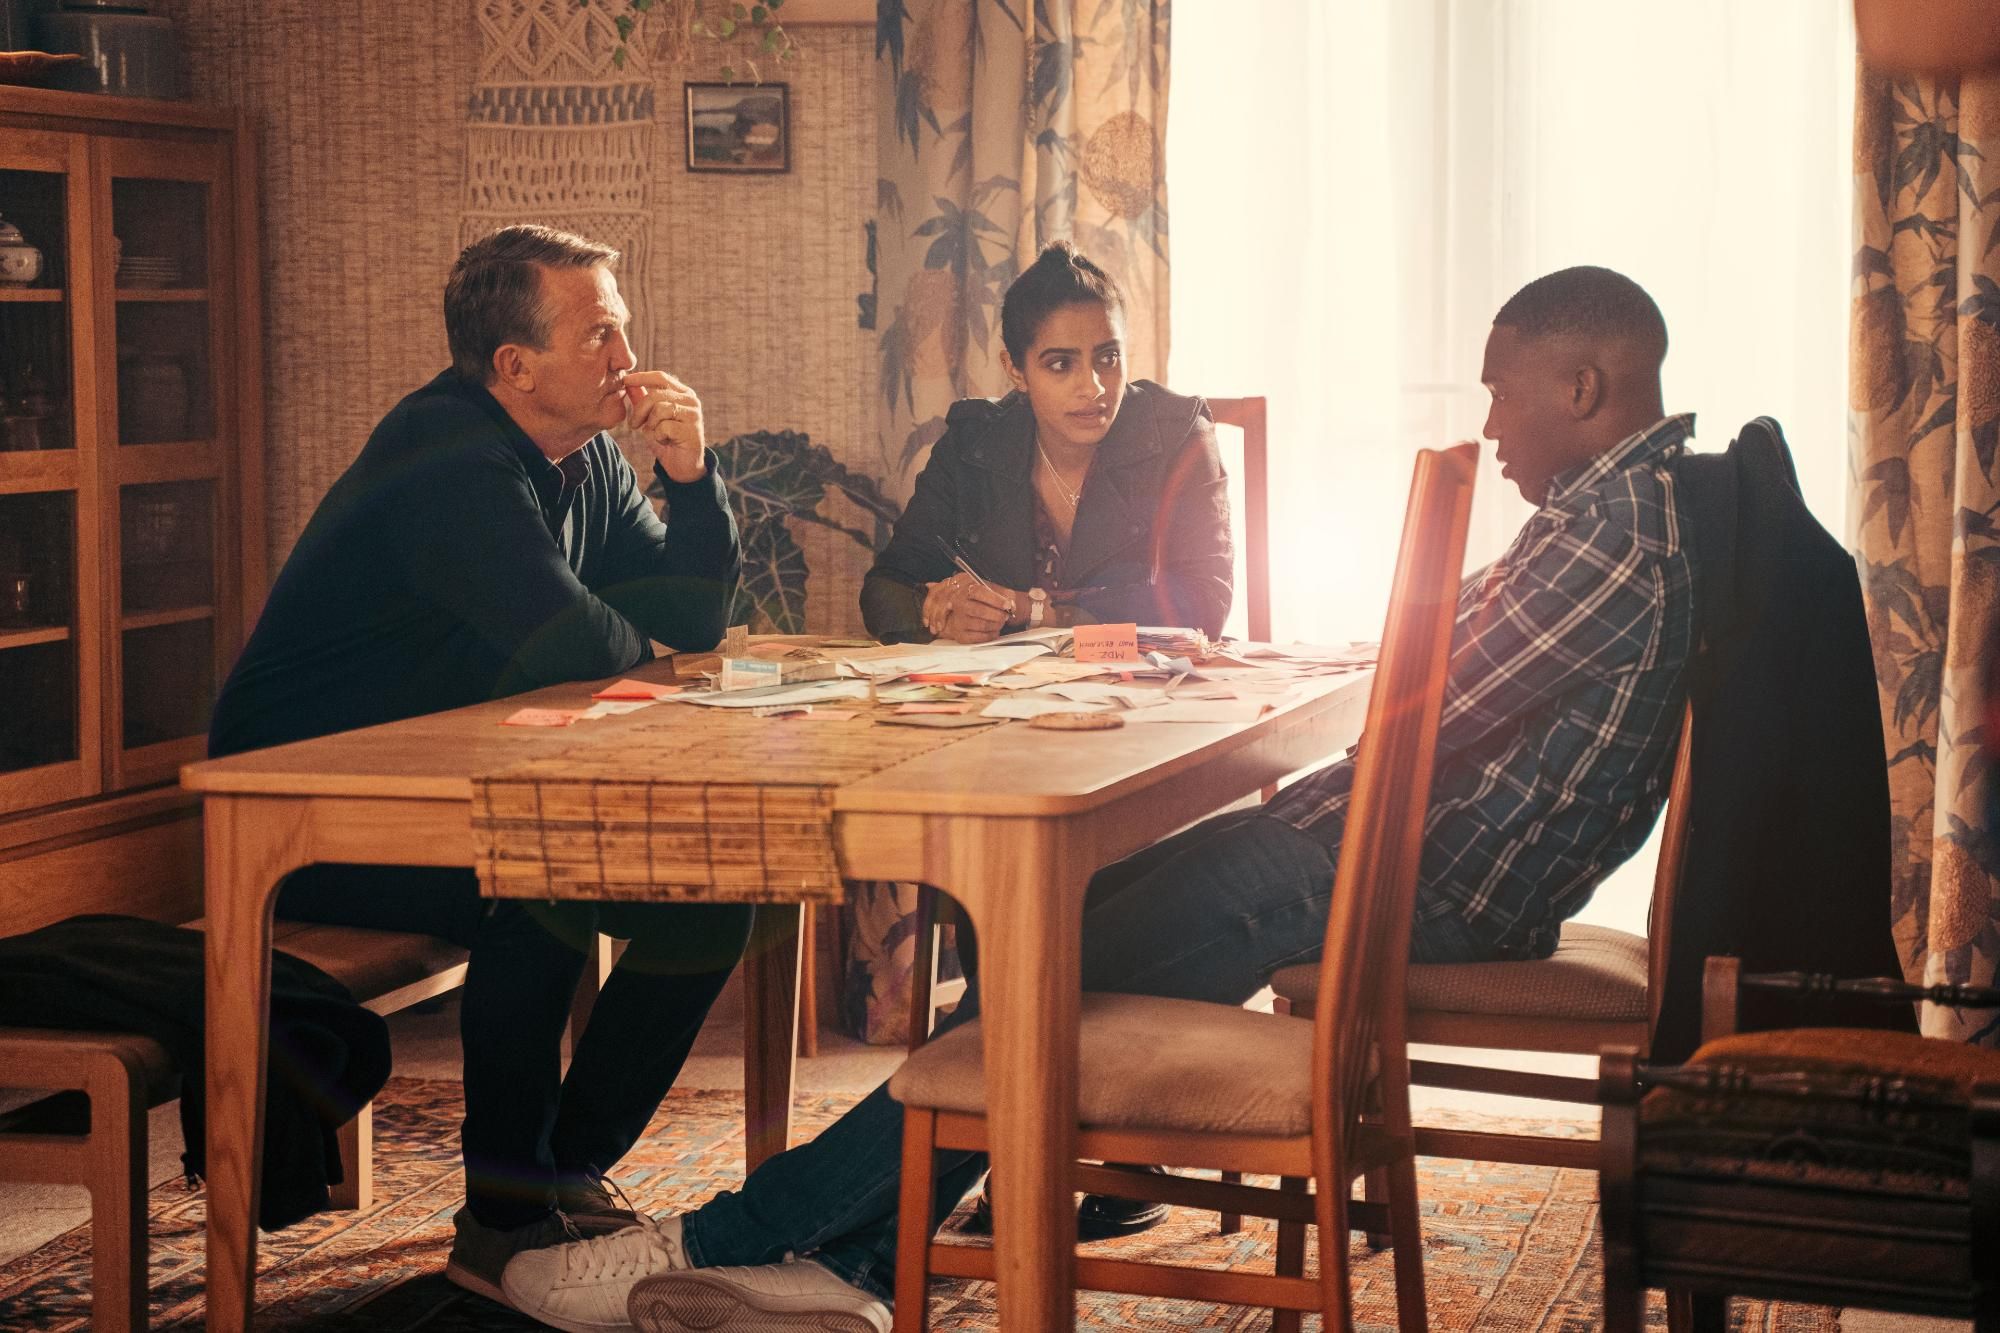 Bradley Walsh, Mandip Gill and Tosin Cole in Doctor Who Holiday Special 2020